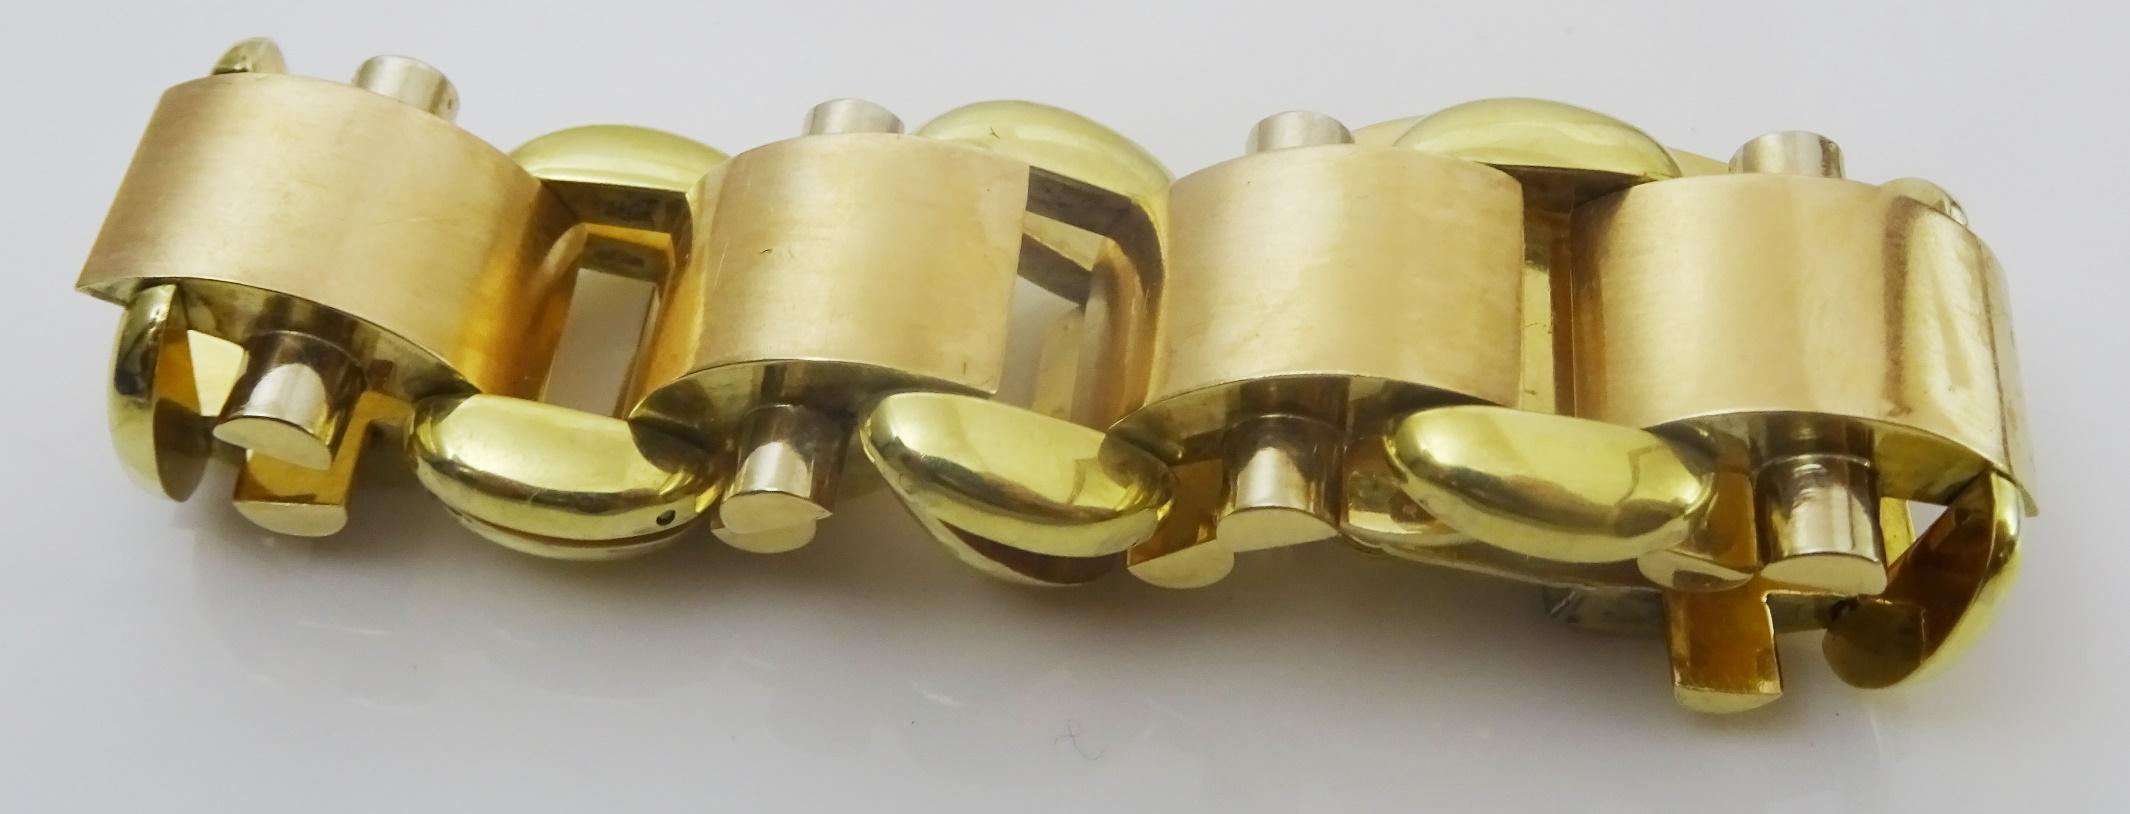 
 
A Unique Vintage Link Bracelet probably from the 1940's, It is manufactured in 14 karat two color gold (Yellow andPink). There is a hallmark but it is illegible, and it has been acid tested for 14 karat. 
The Pink Gold Links are Matte and the